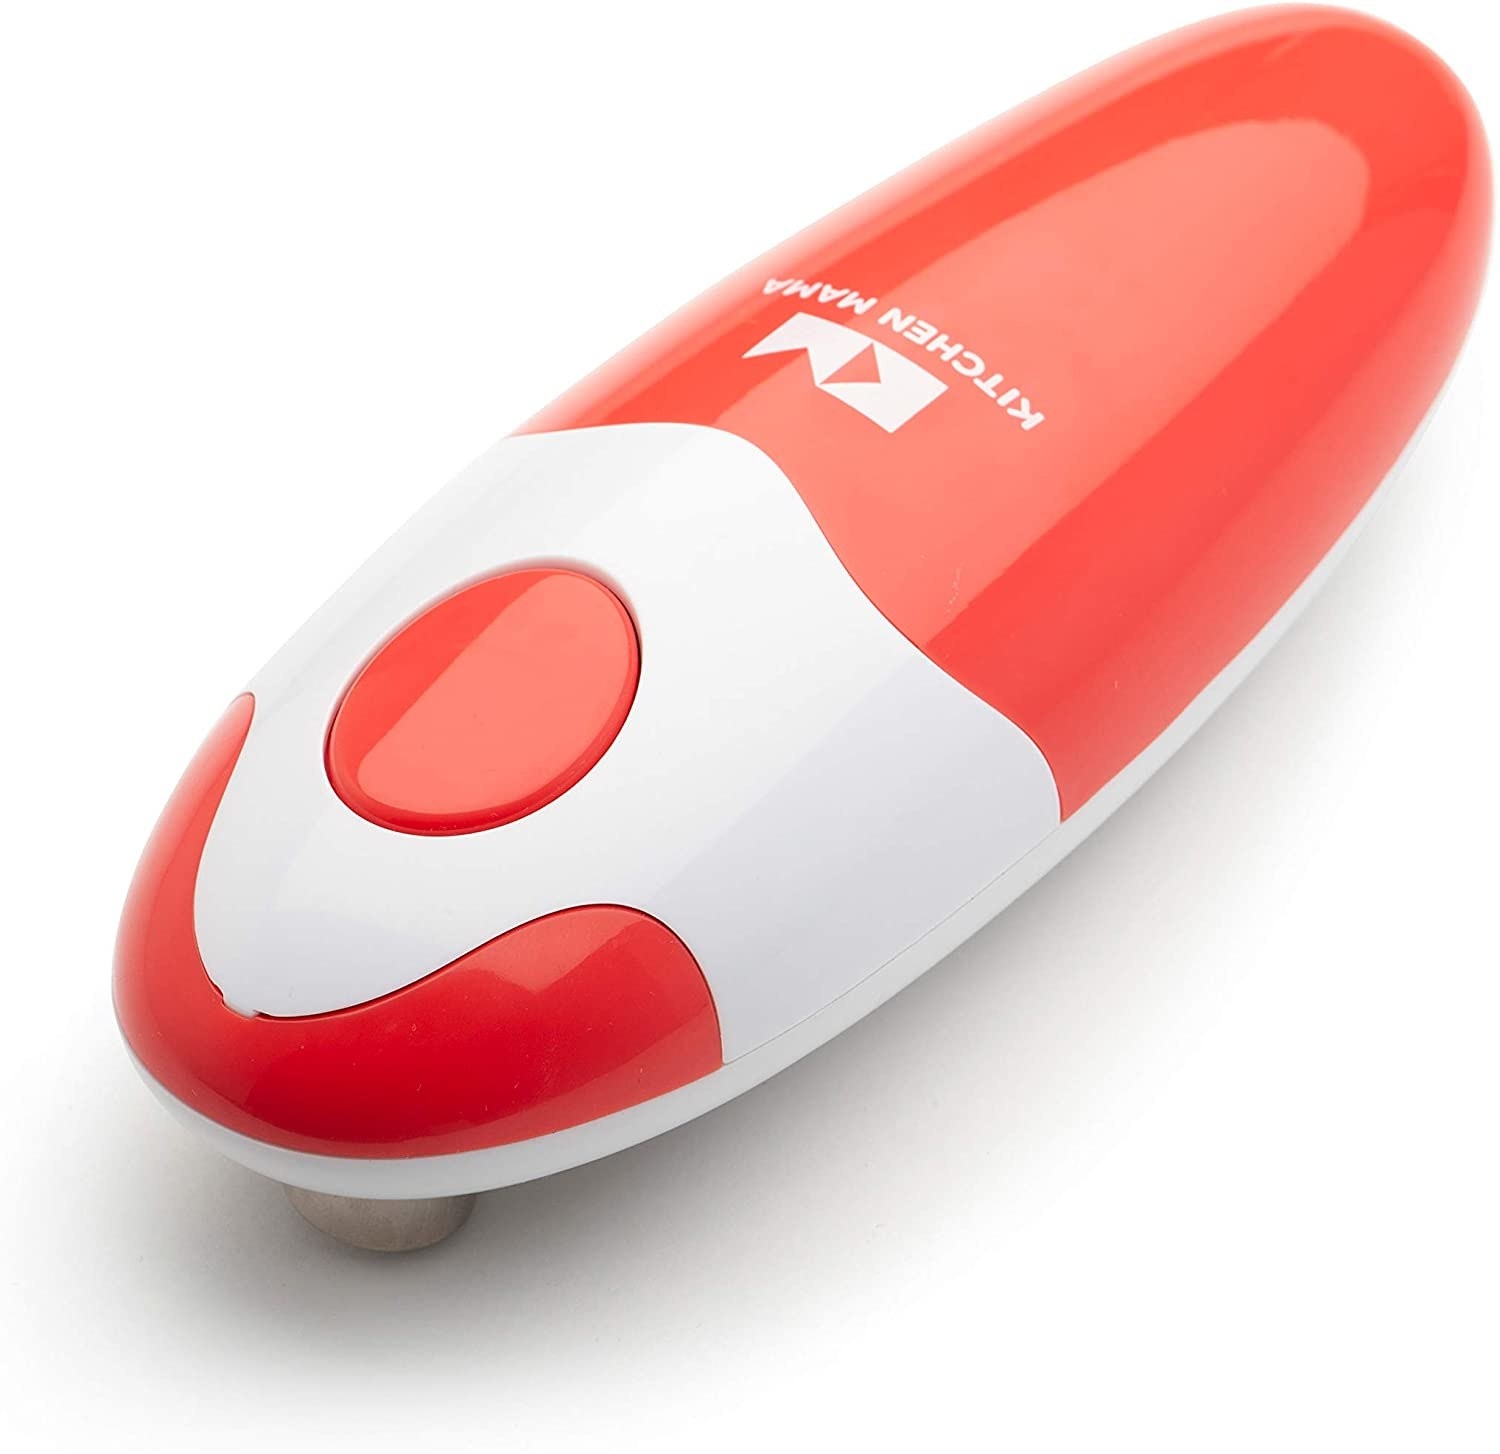 The Kitchen Mama electric can opener in red and white.